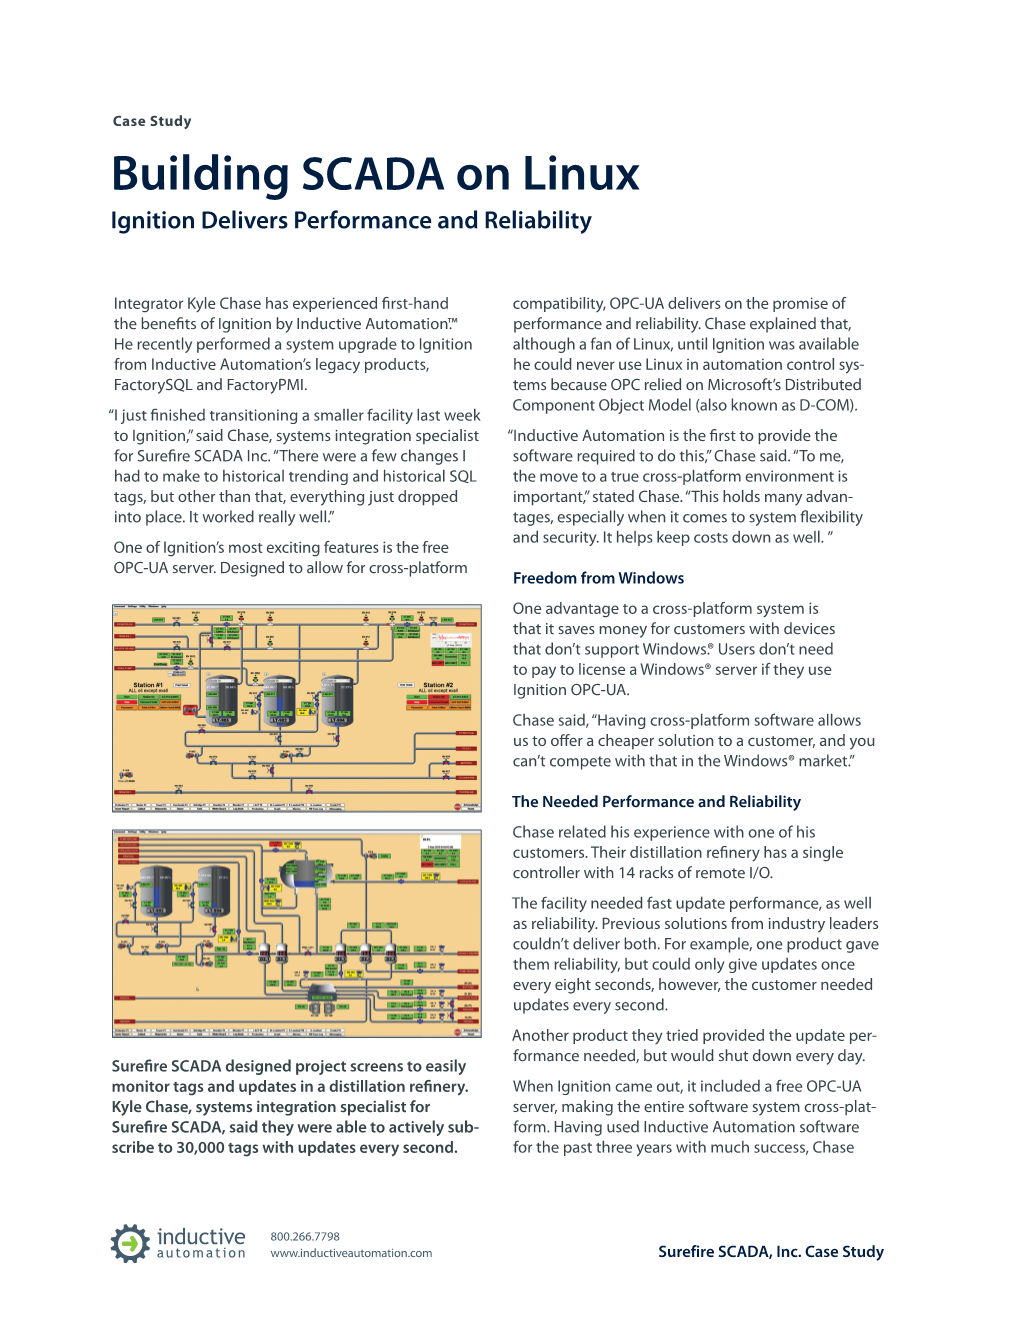 Building SCADA on Linux Ignition Delivers Performance and Reliability